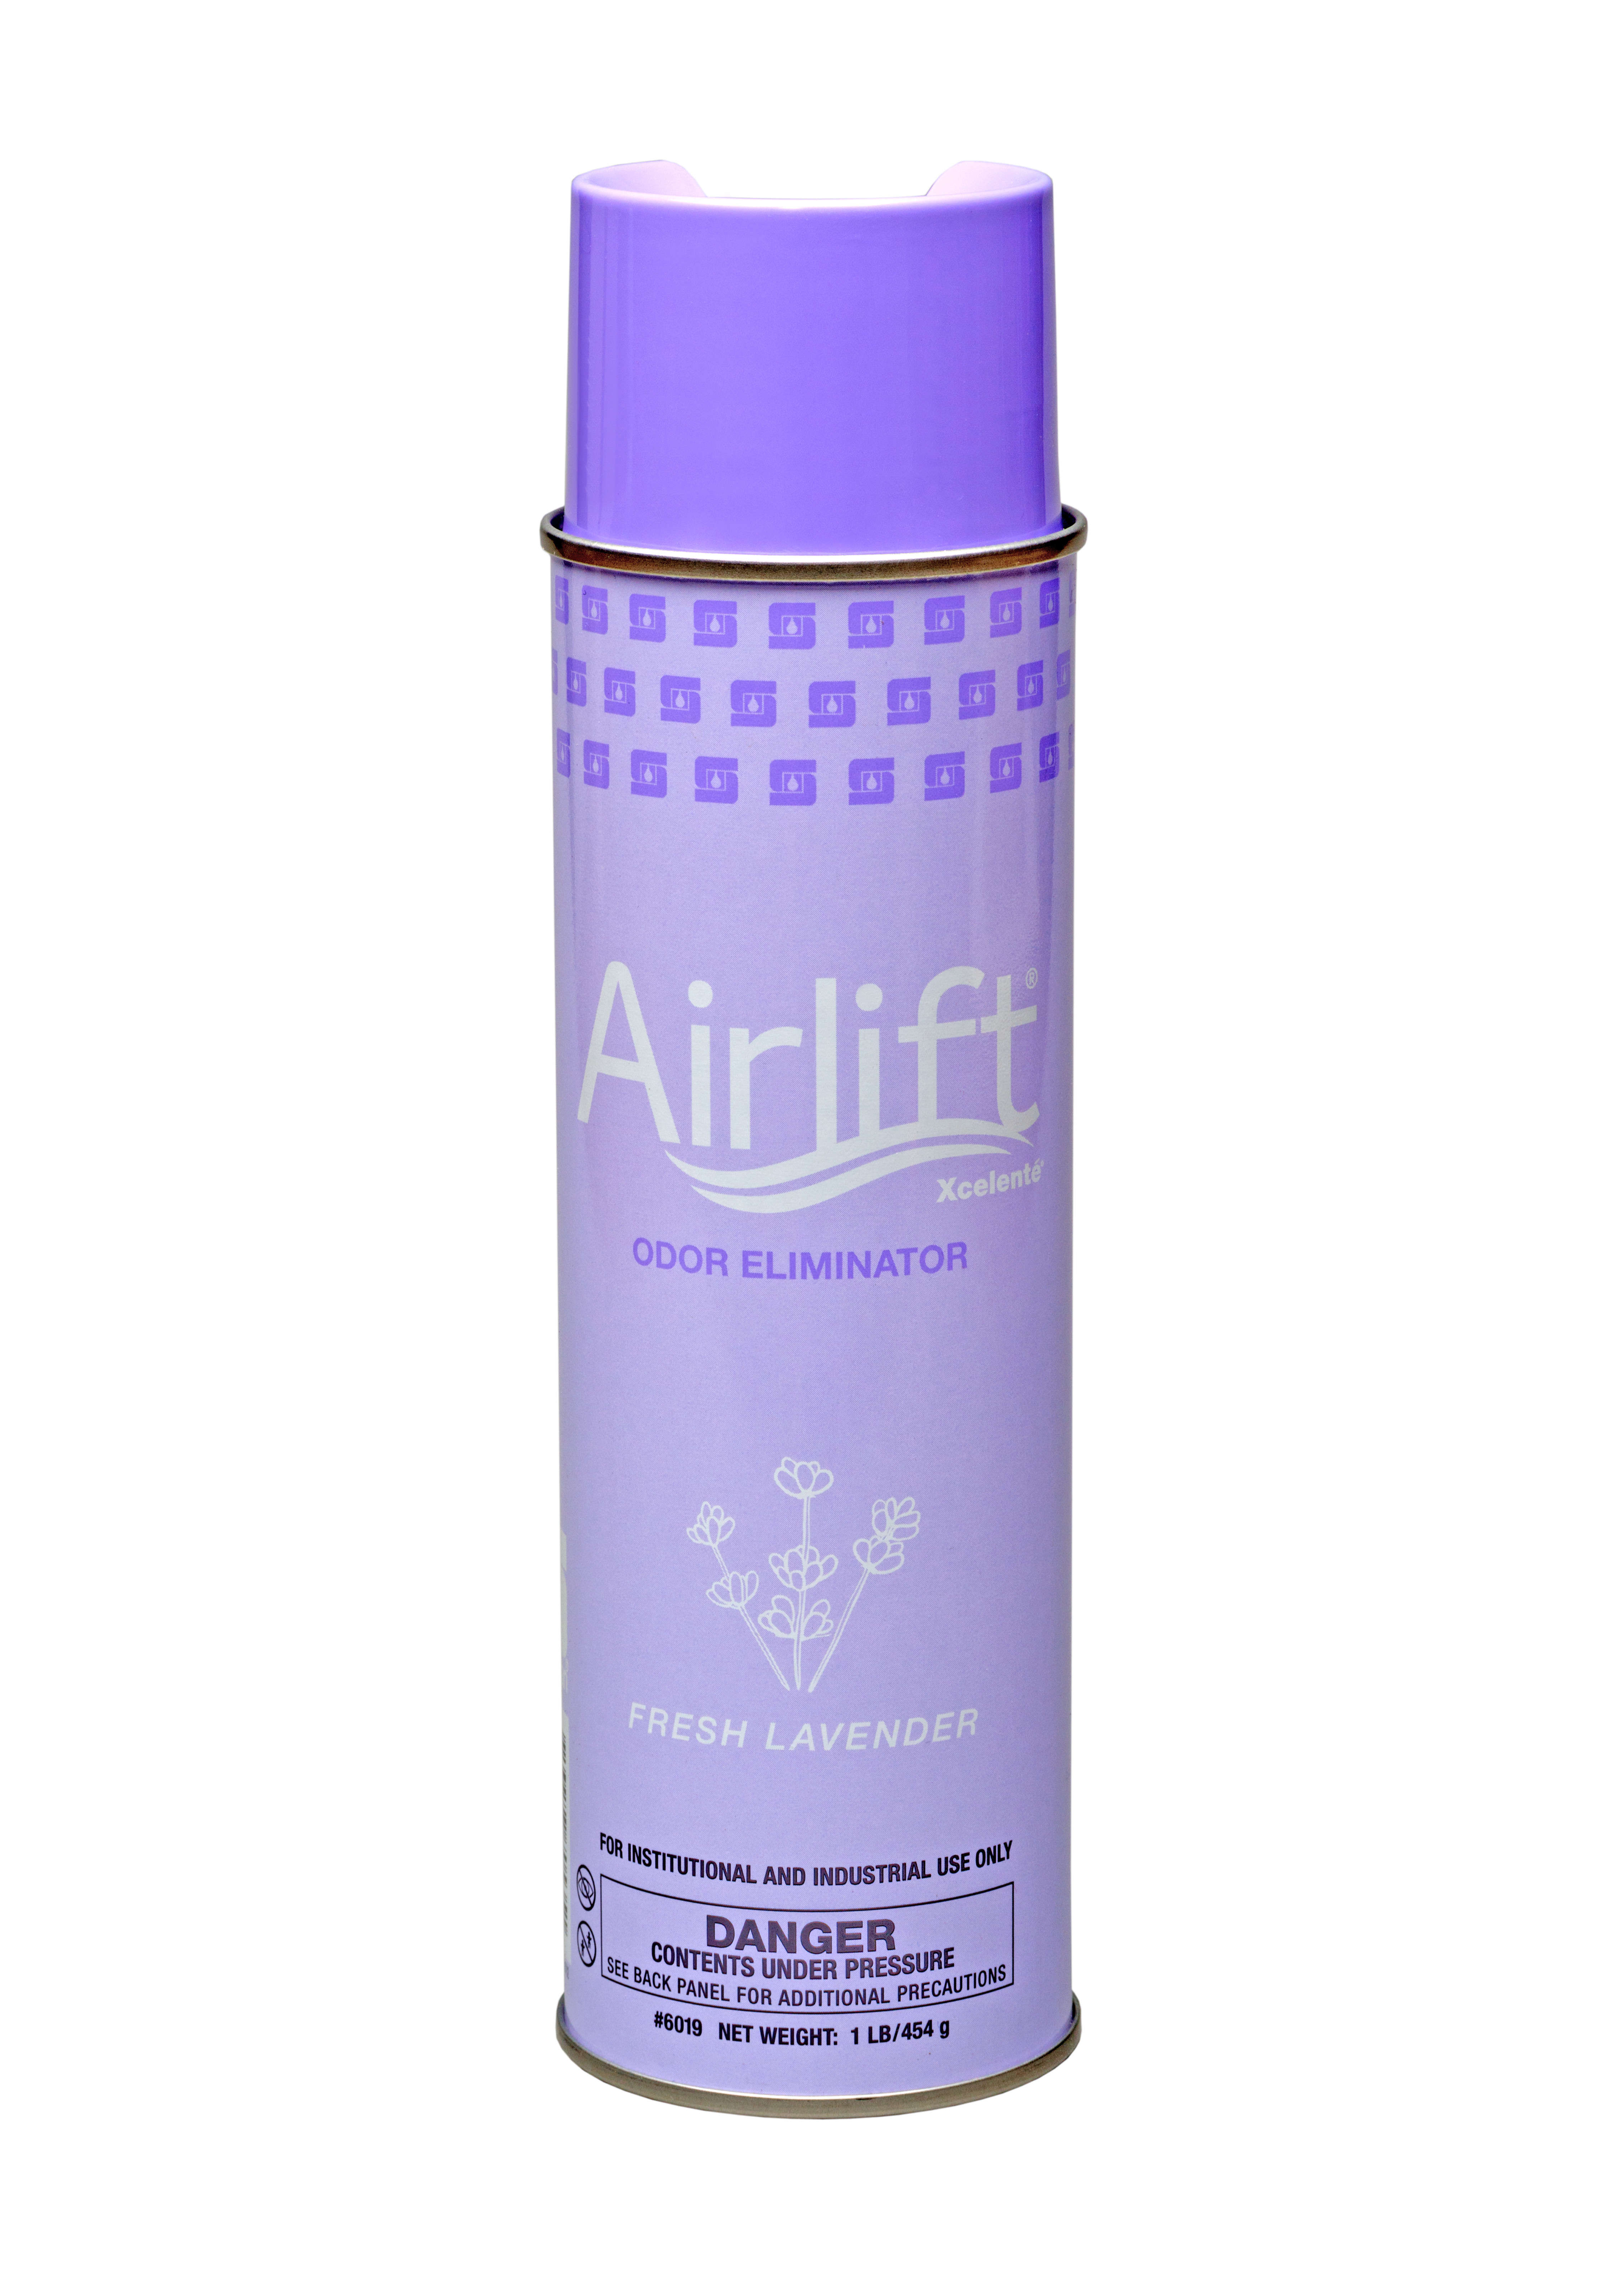 Spartan Chemical Company Airlift Xcelente Odor Eliminator, 12-20 OZ.CAN